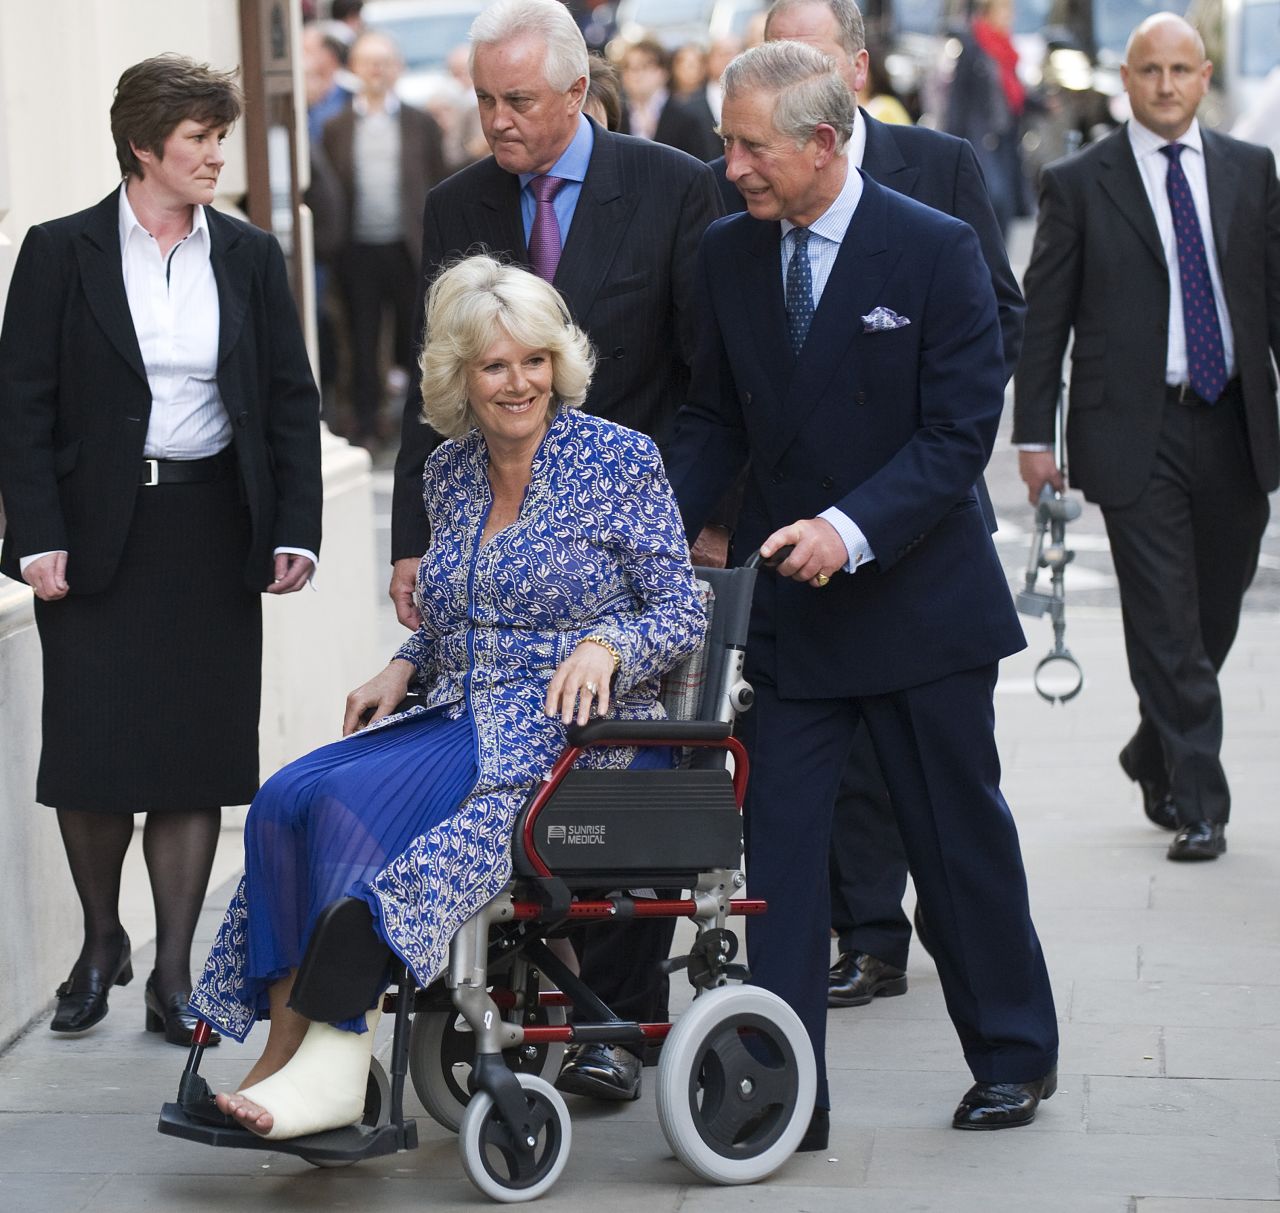 Charles pushes Camilla in a wheelchair as they attend the premiere of "Aida" at the Royal Opera House in London in April 2010. She had suffered a broken leg weeks prior. 